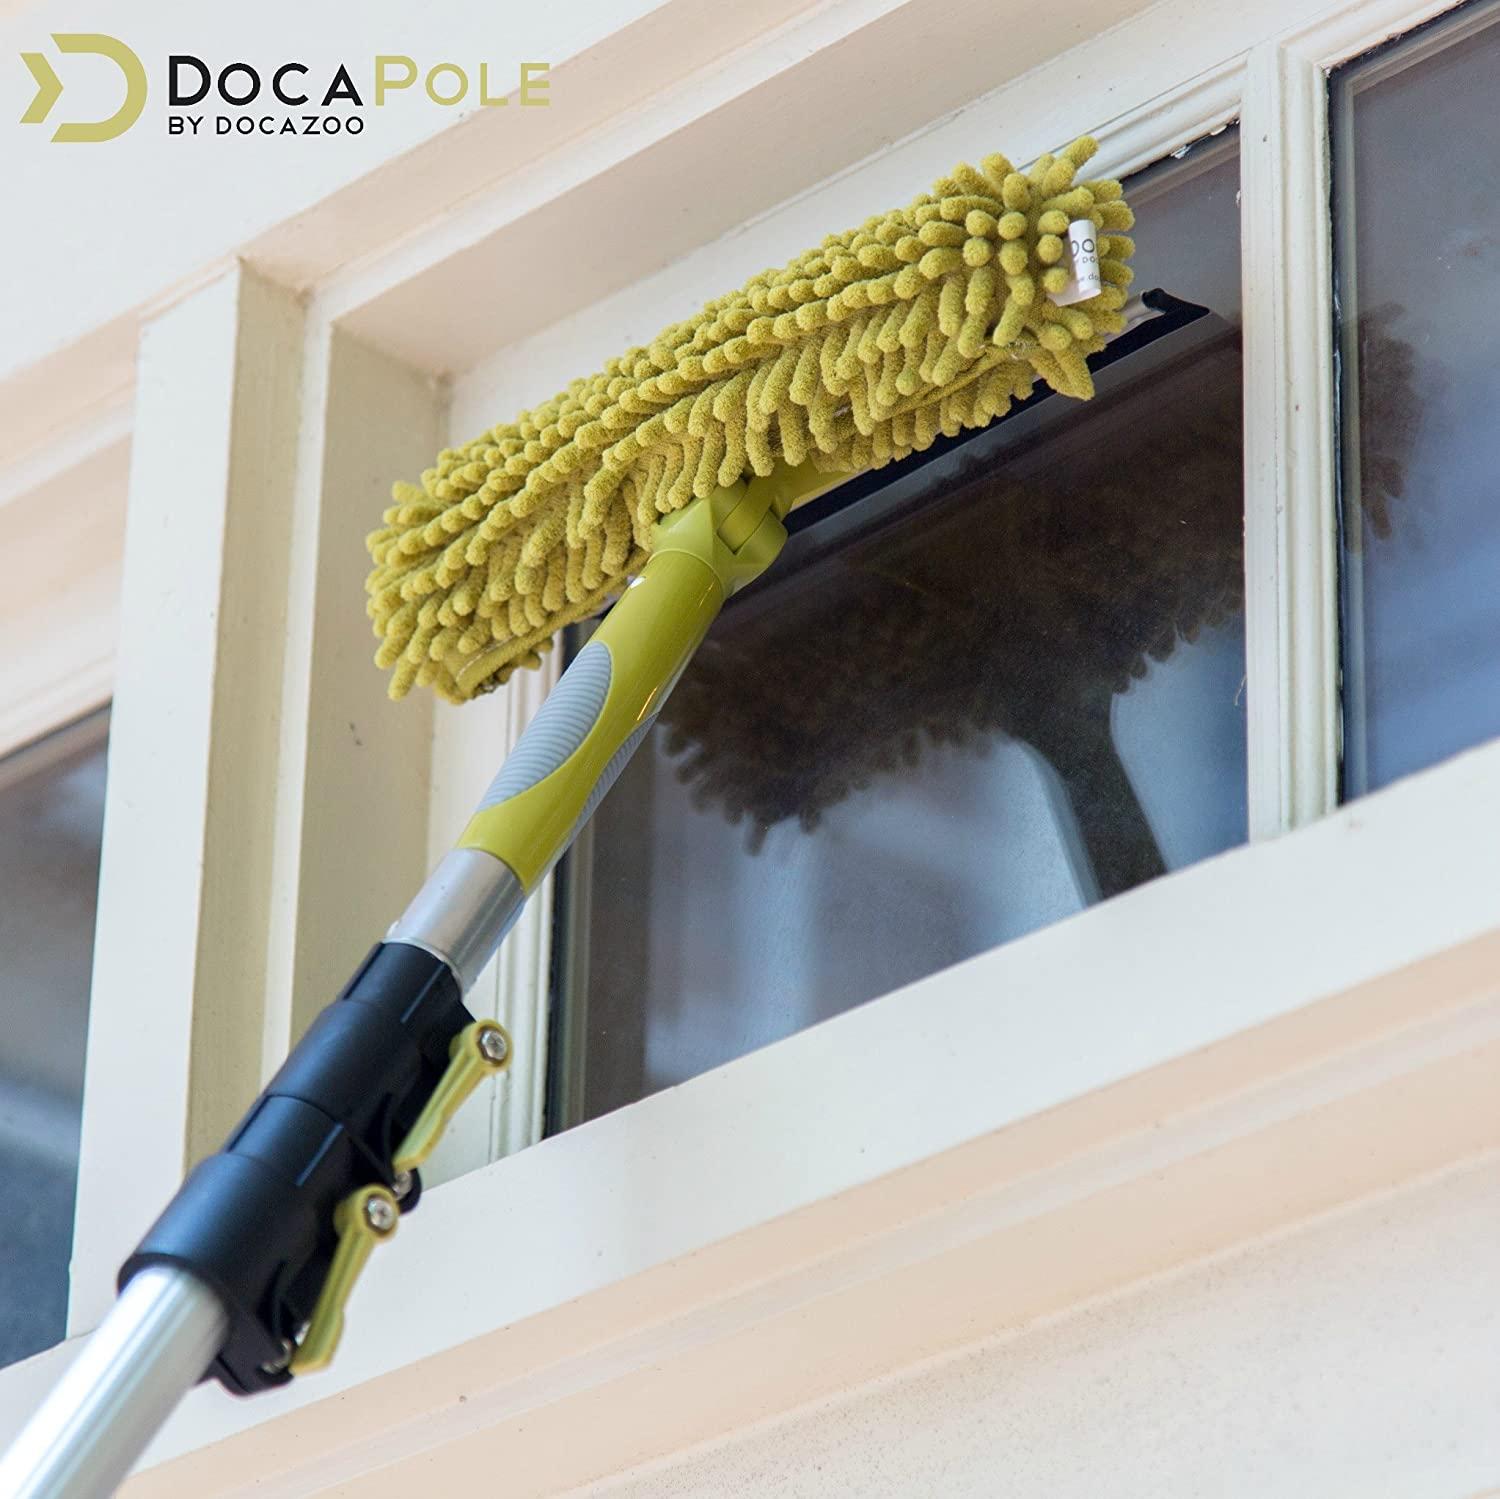 Docapole 20 ft Reach Window Washing Kit with 5 to 12 ft